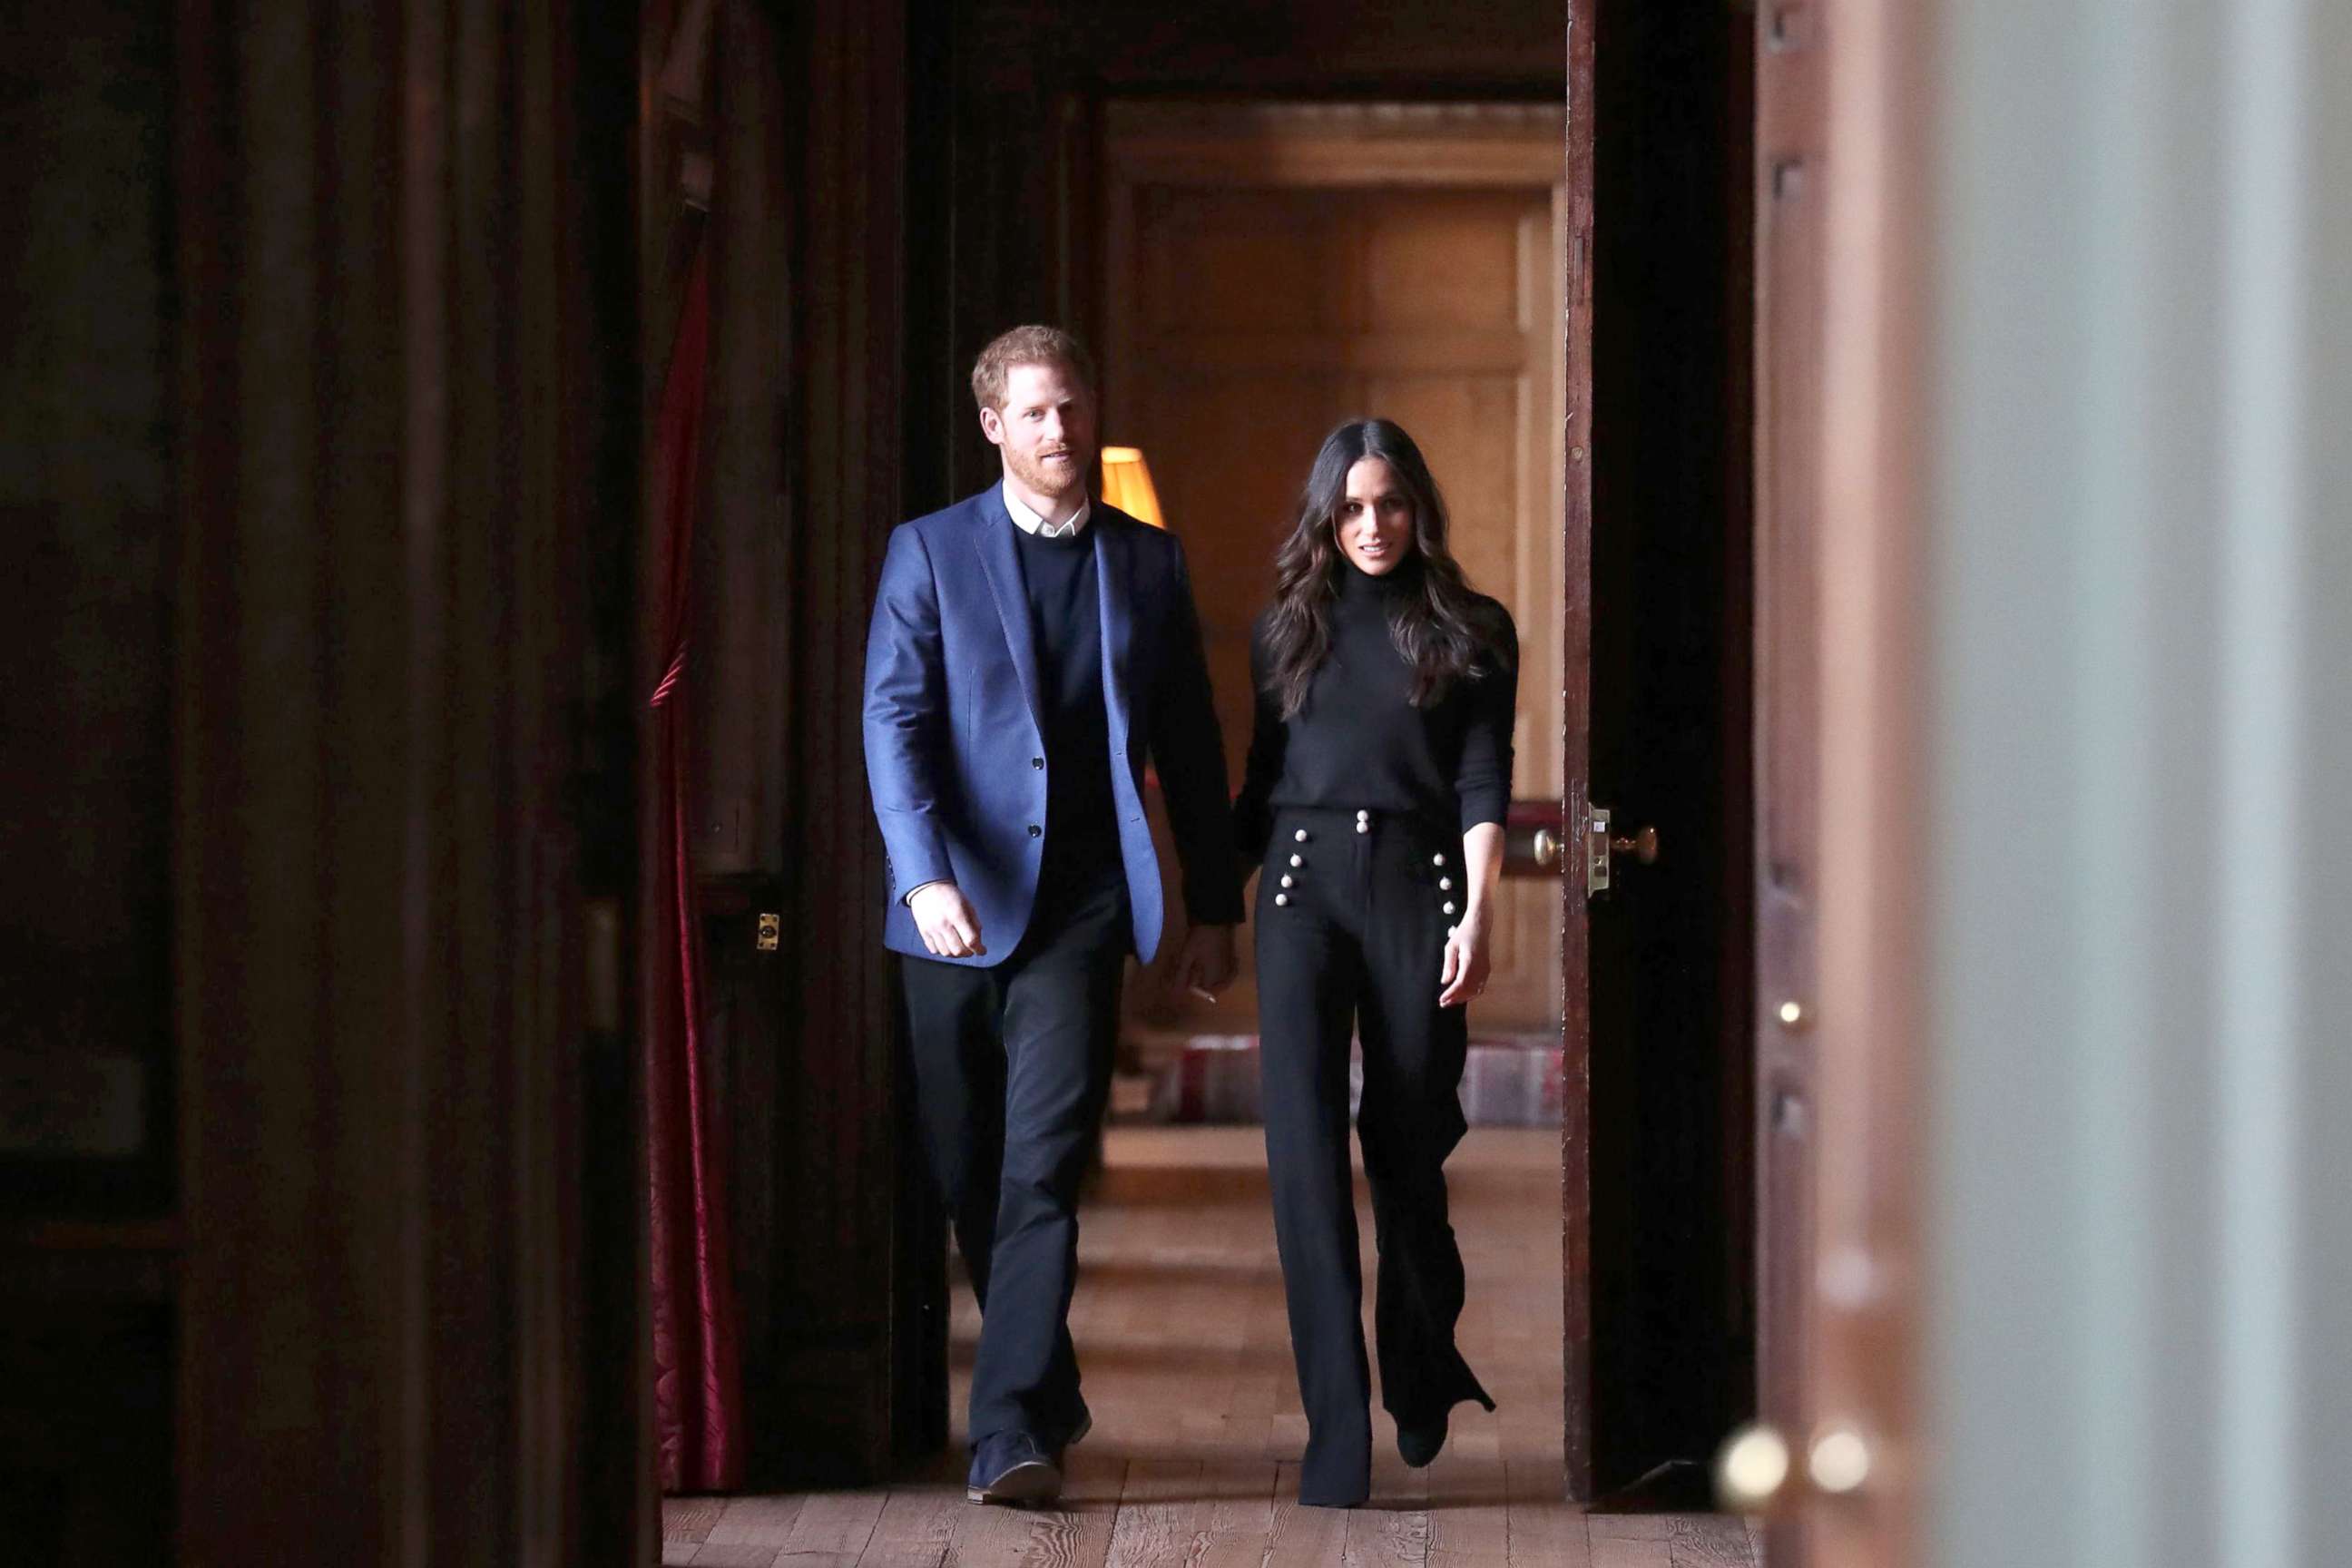 PHOTO: Britain's Prince Harry and his fiance actress Meghan Markle walk through the corridors of the Palace of Holyroodhouse on their way to a reception for young people in Edinburgh, during their visit to Scotland, Feb. 13, 2018.